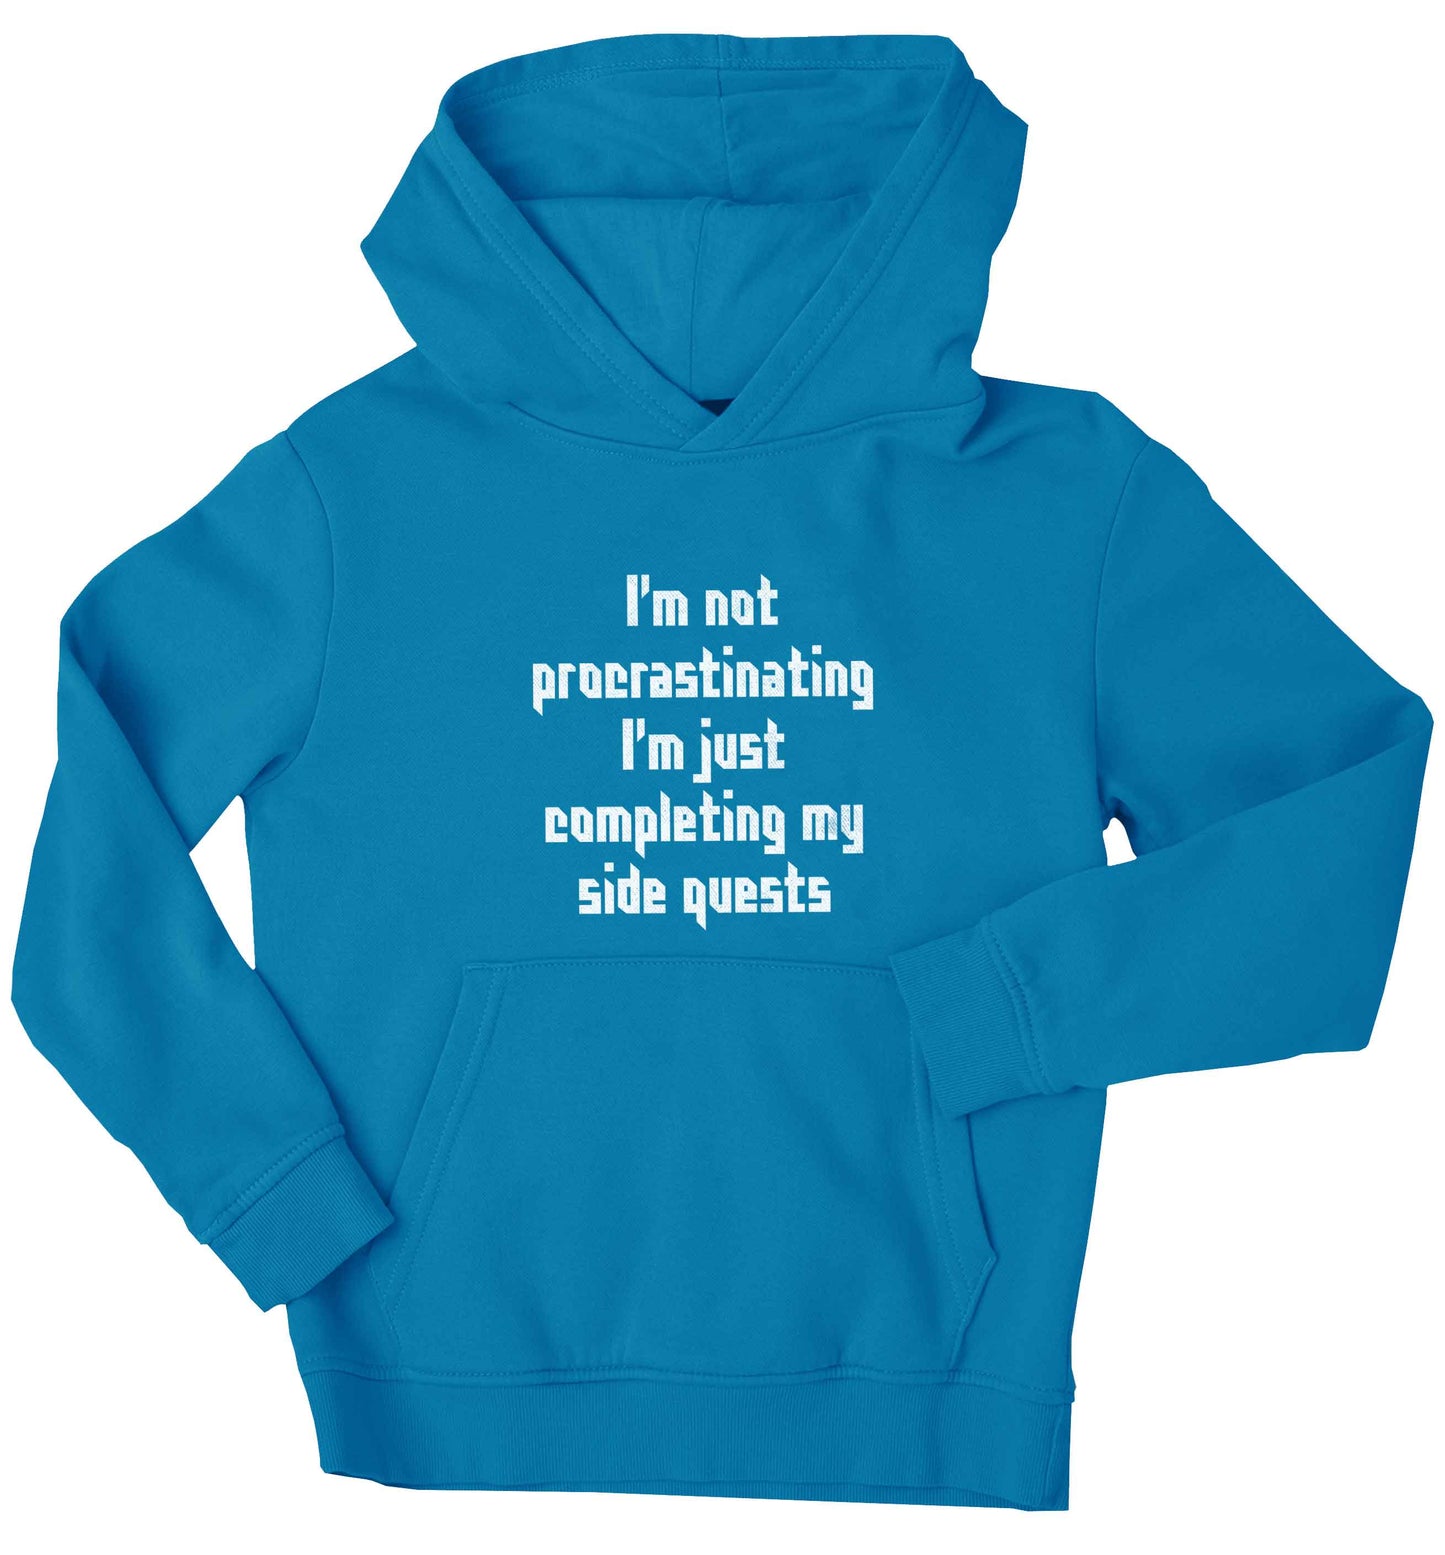 I'm not procrastinating I'm just completing my side quests children's blue hoodie 12-13 Years